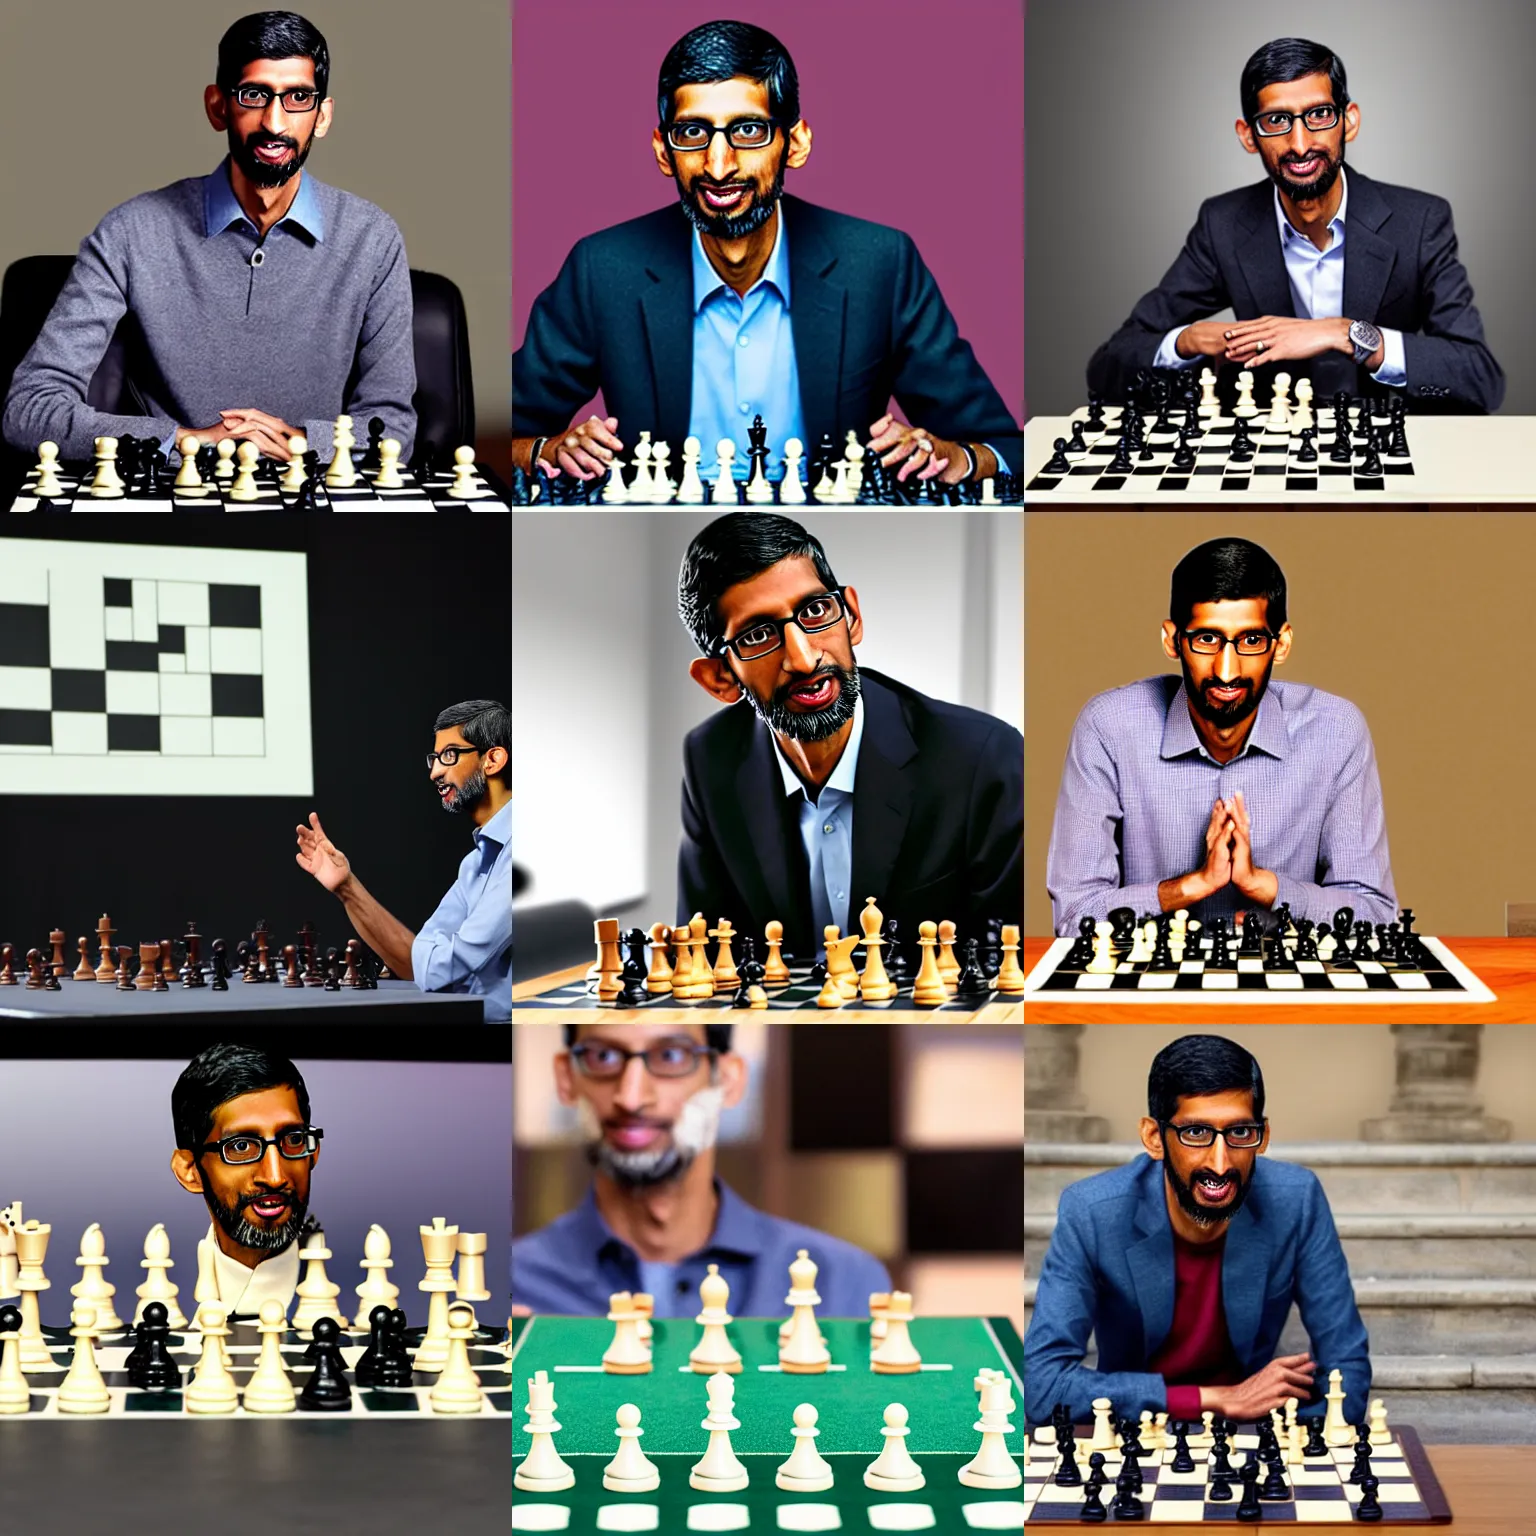 Prompt: sundar pichai challenges you to a game of chess